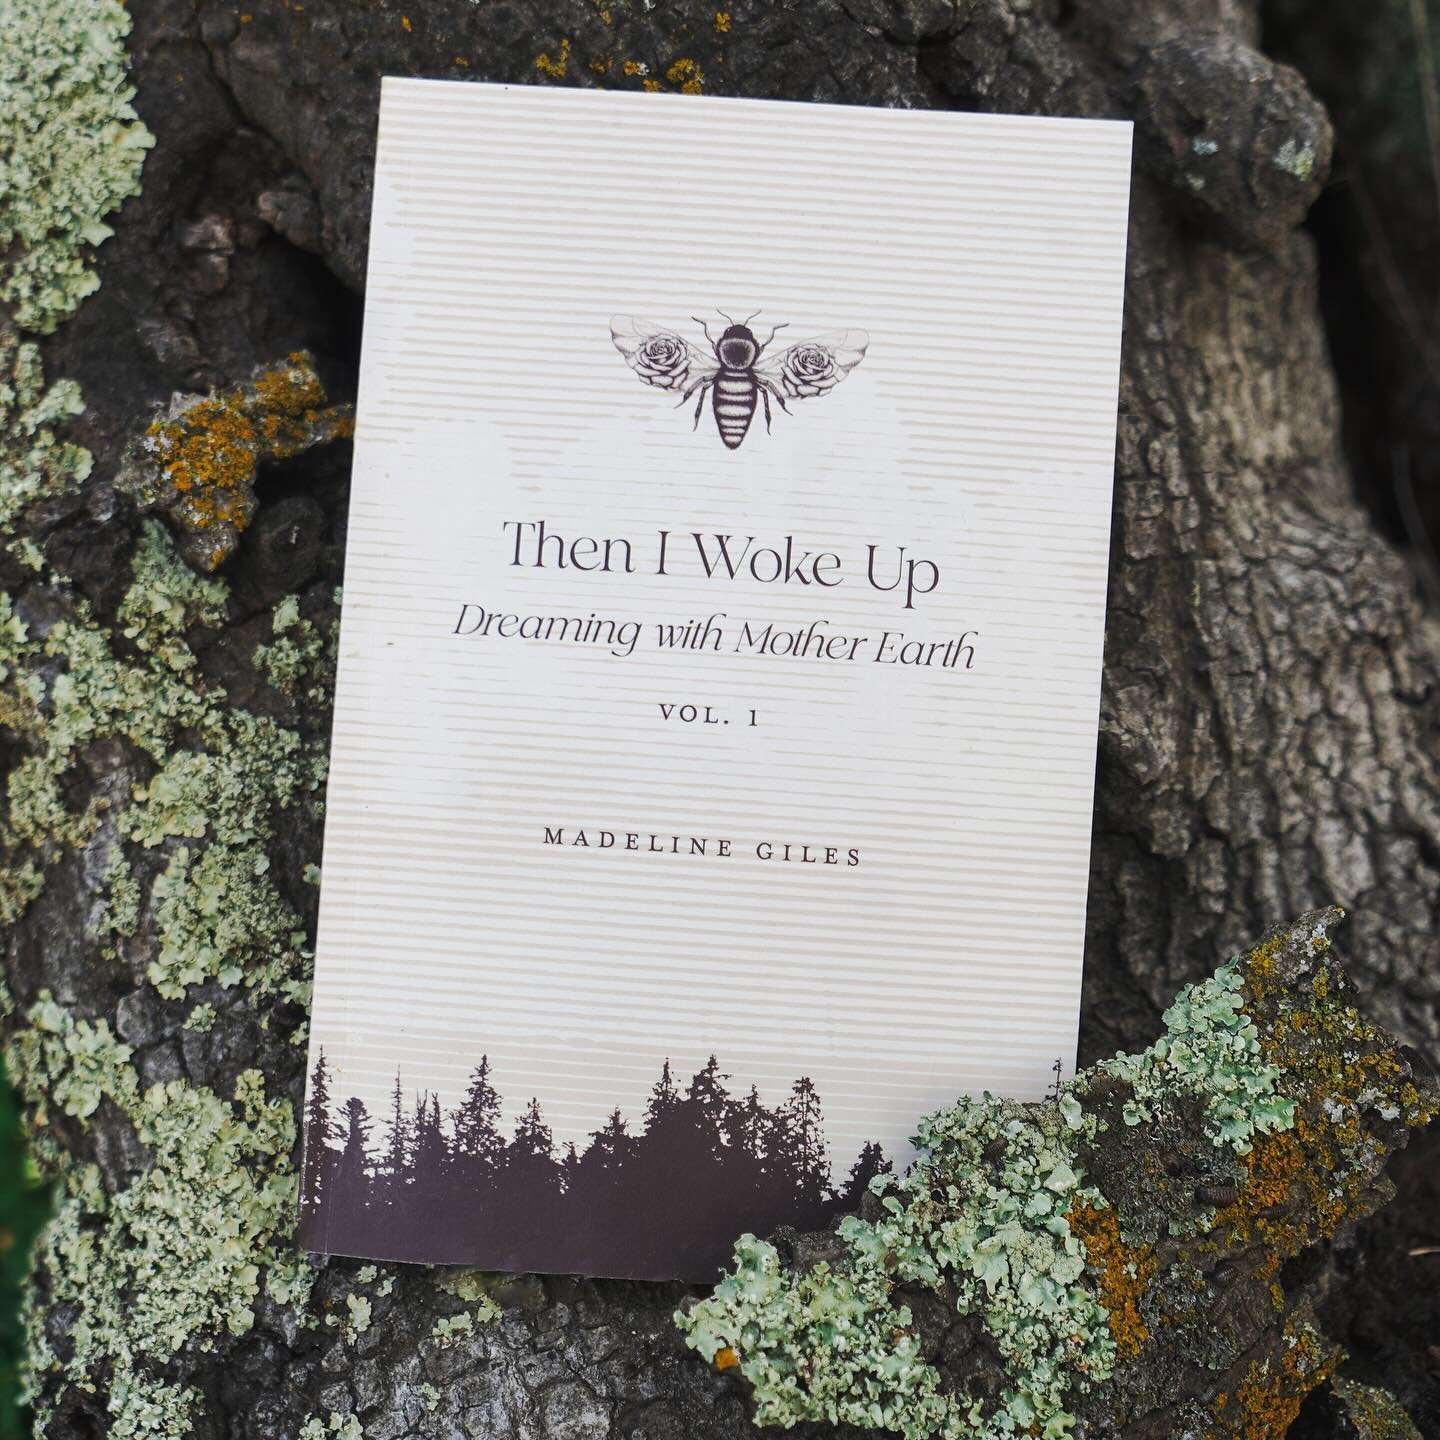 My bedside dreaming booklet has woven her way into the world for a little over two weeks now!🌀Some of you have written me about the dreams you've received since reading the book - dreams of trees and snakes, butterfly forests and nightingale temples